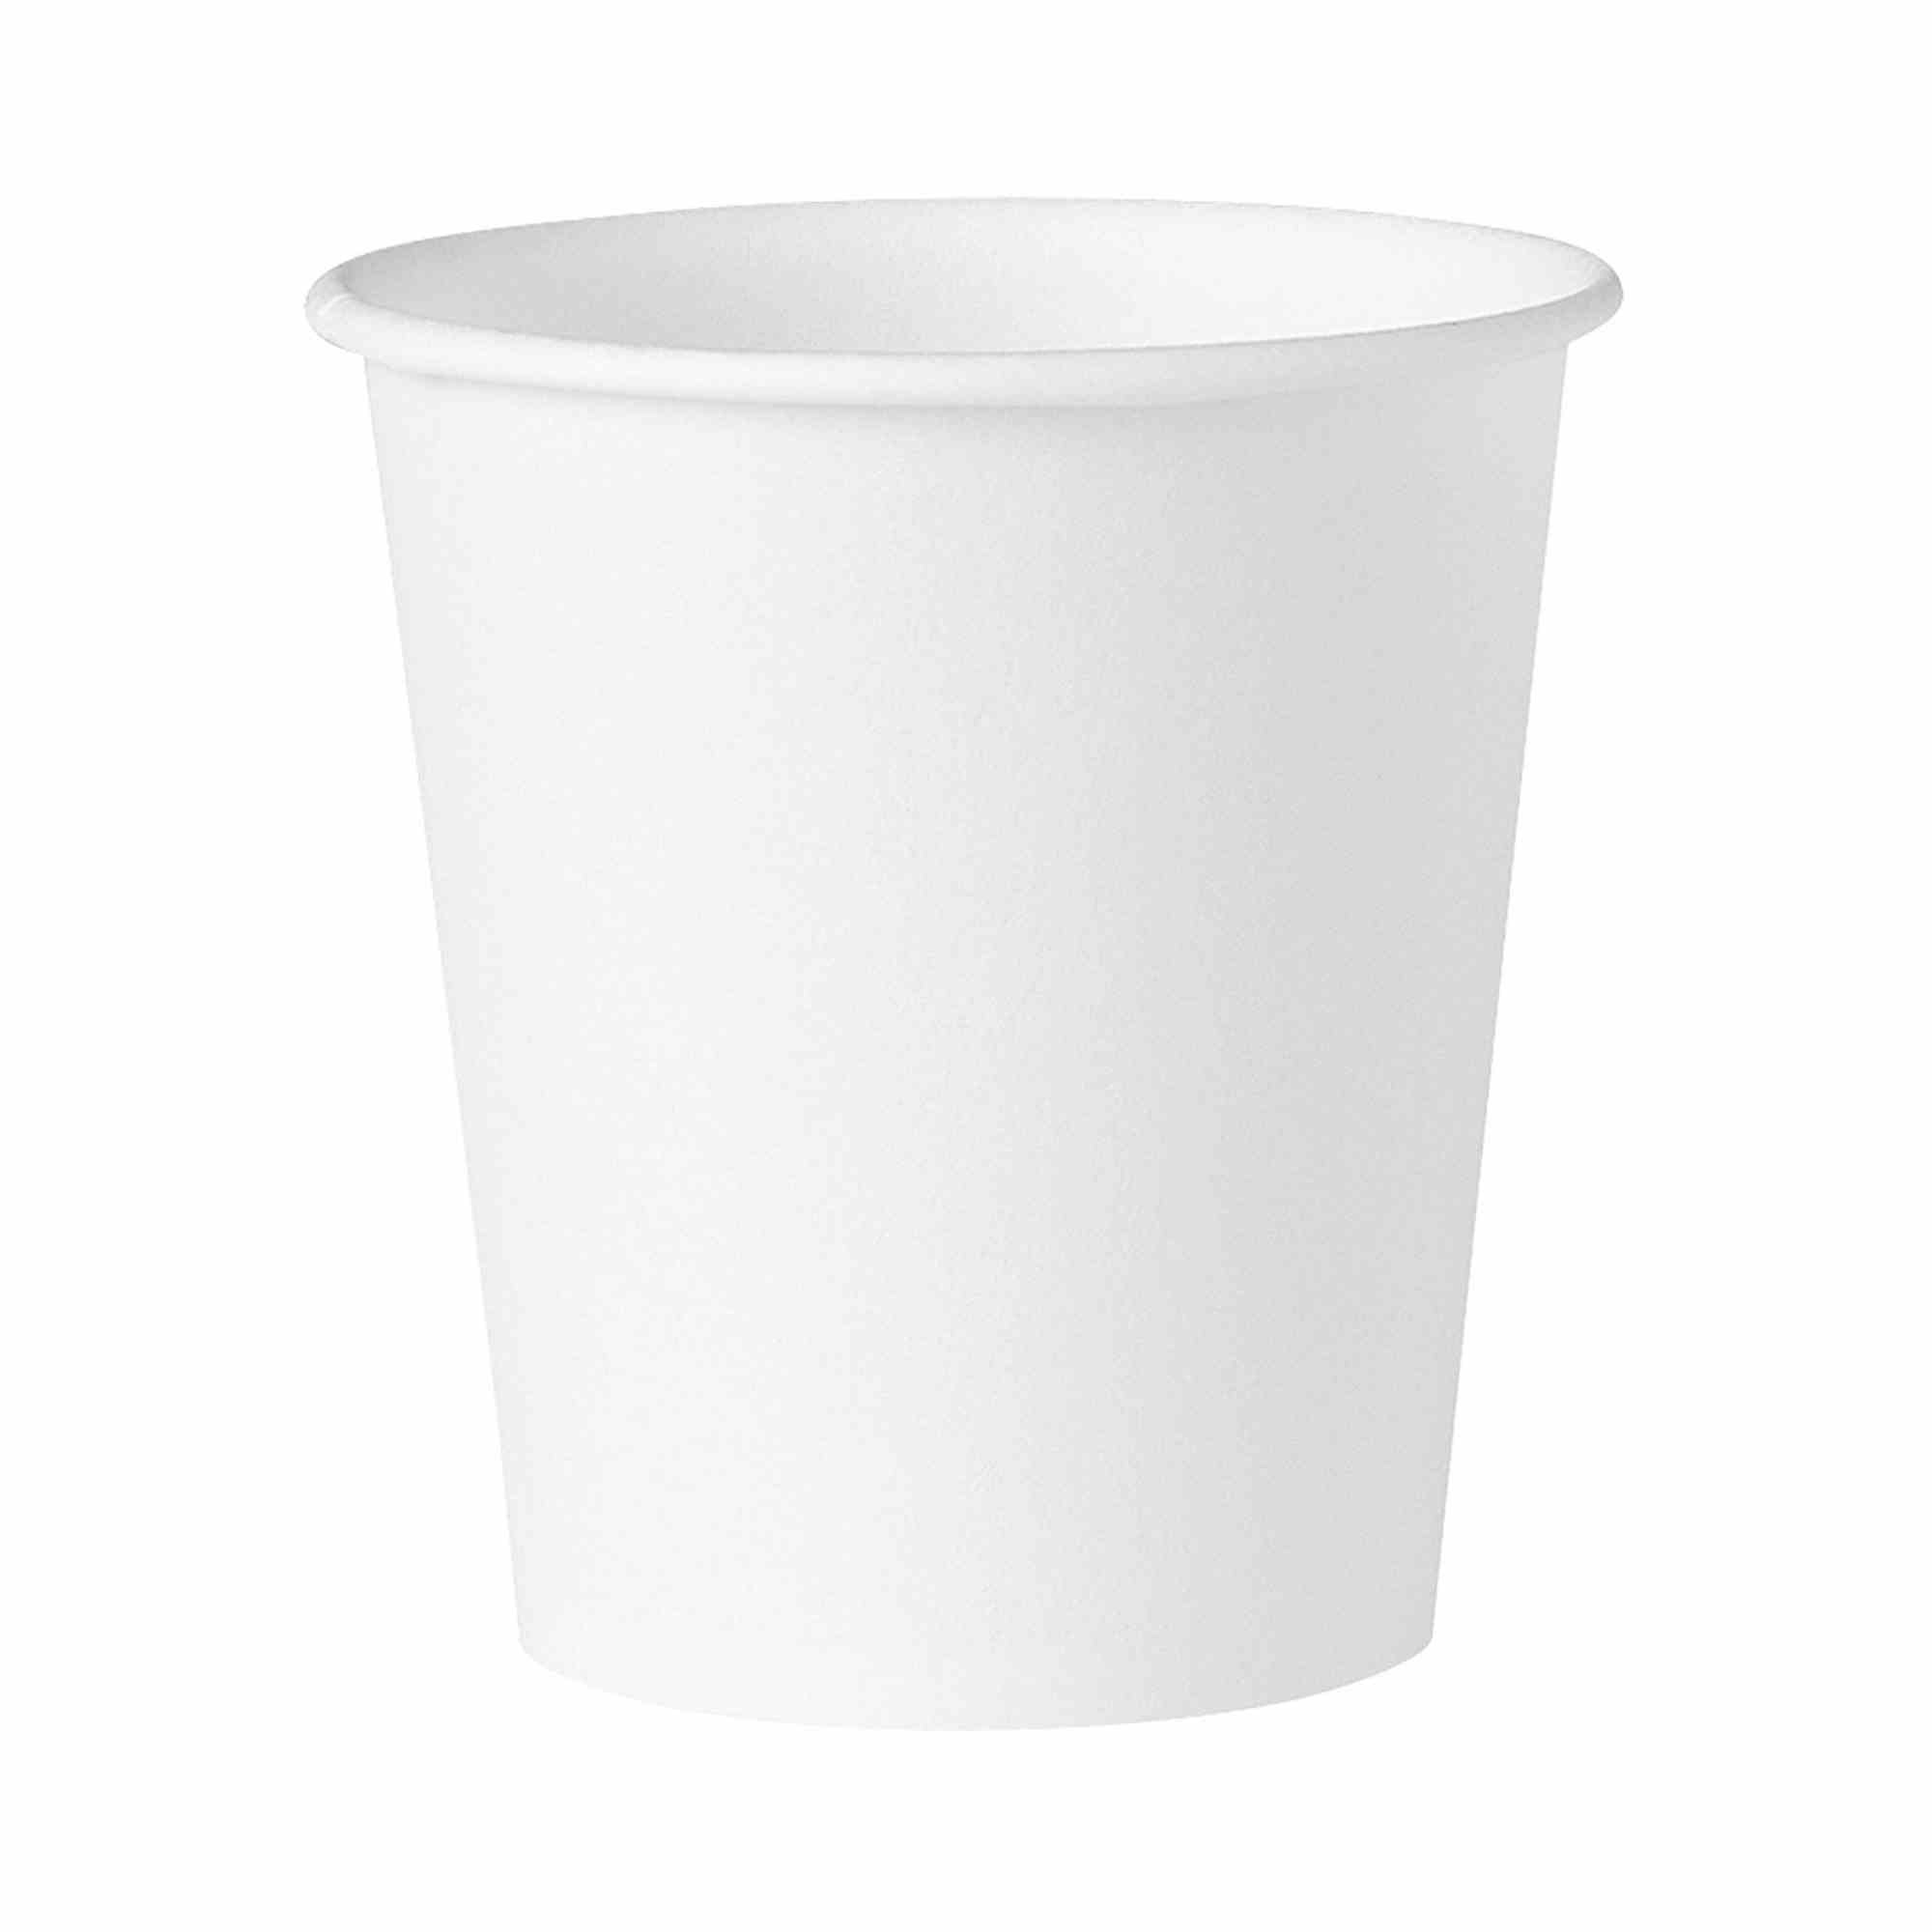 Bare Eco-Forward Disposable Drinking Cups, 44-2050, 3 oz. - Box of 100